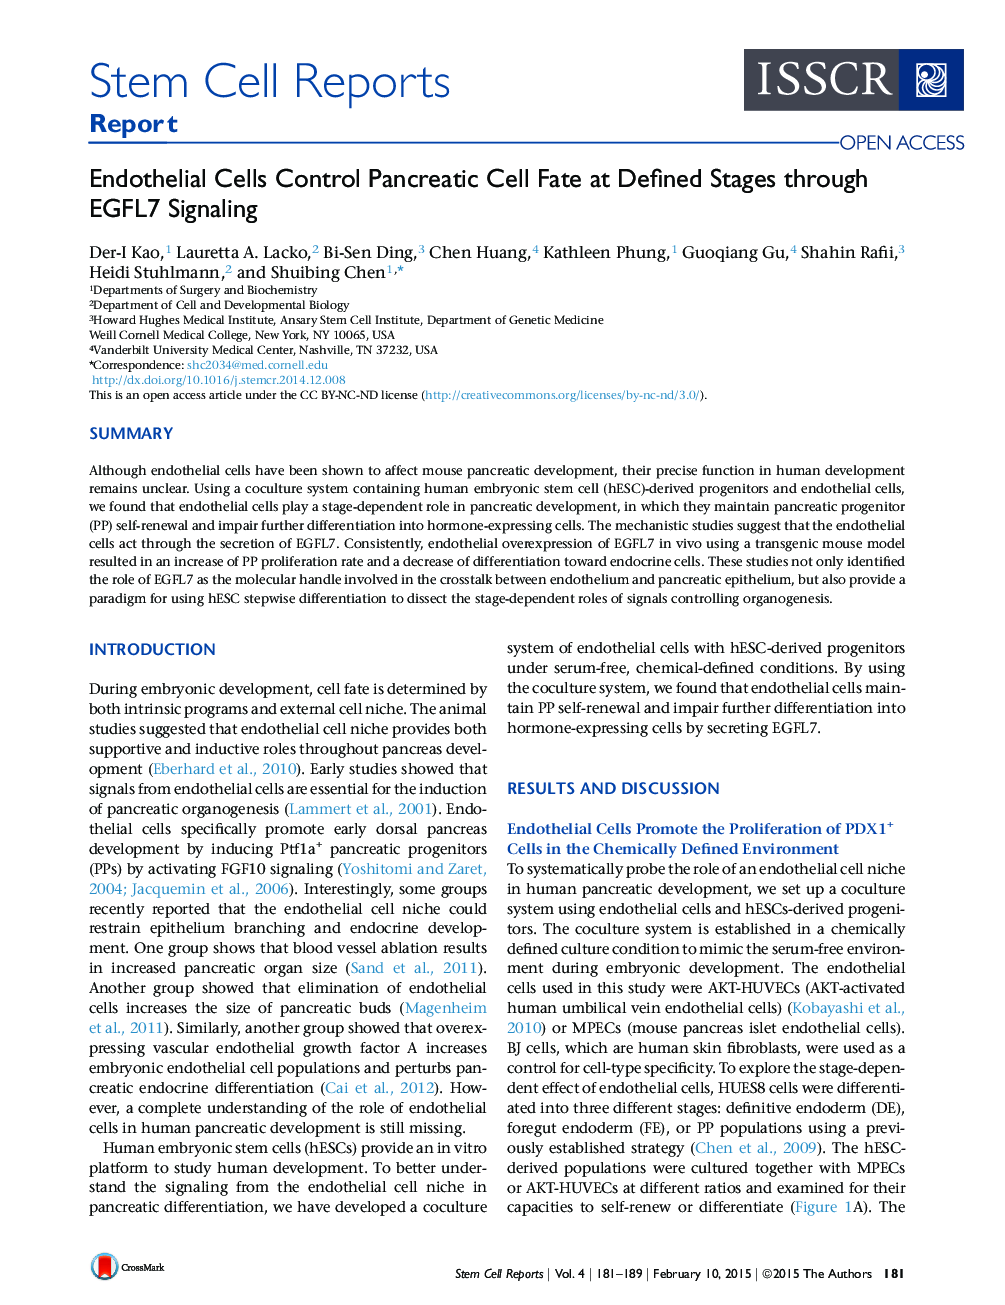 Endothelial Cells Control Pancreatic Cell Fate at Defined Stages through EGFL7 Signaling 